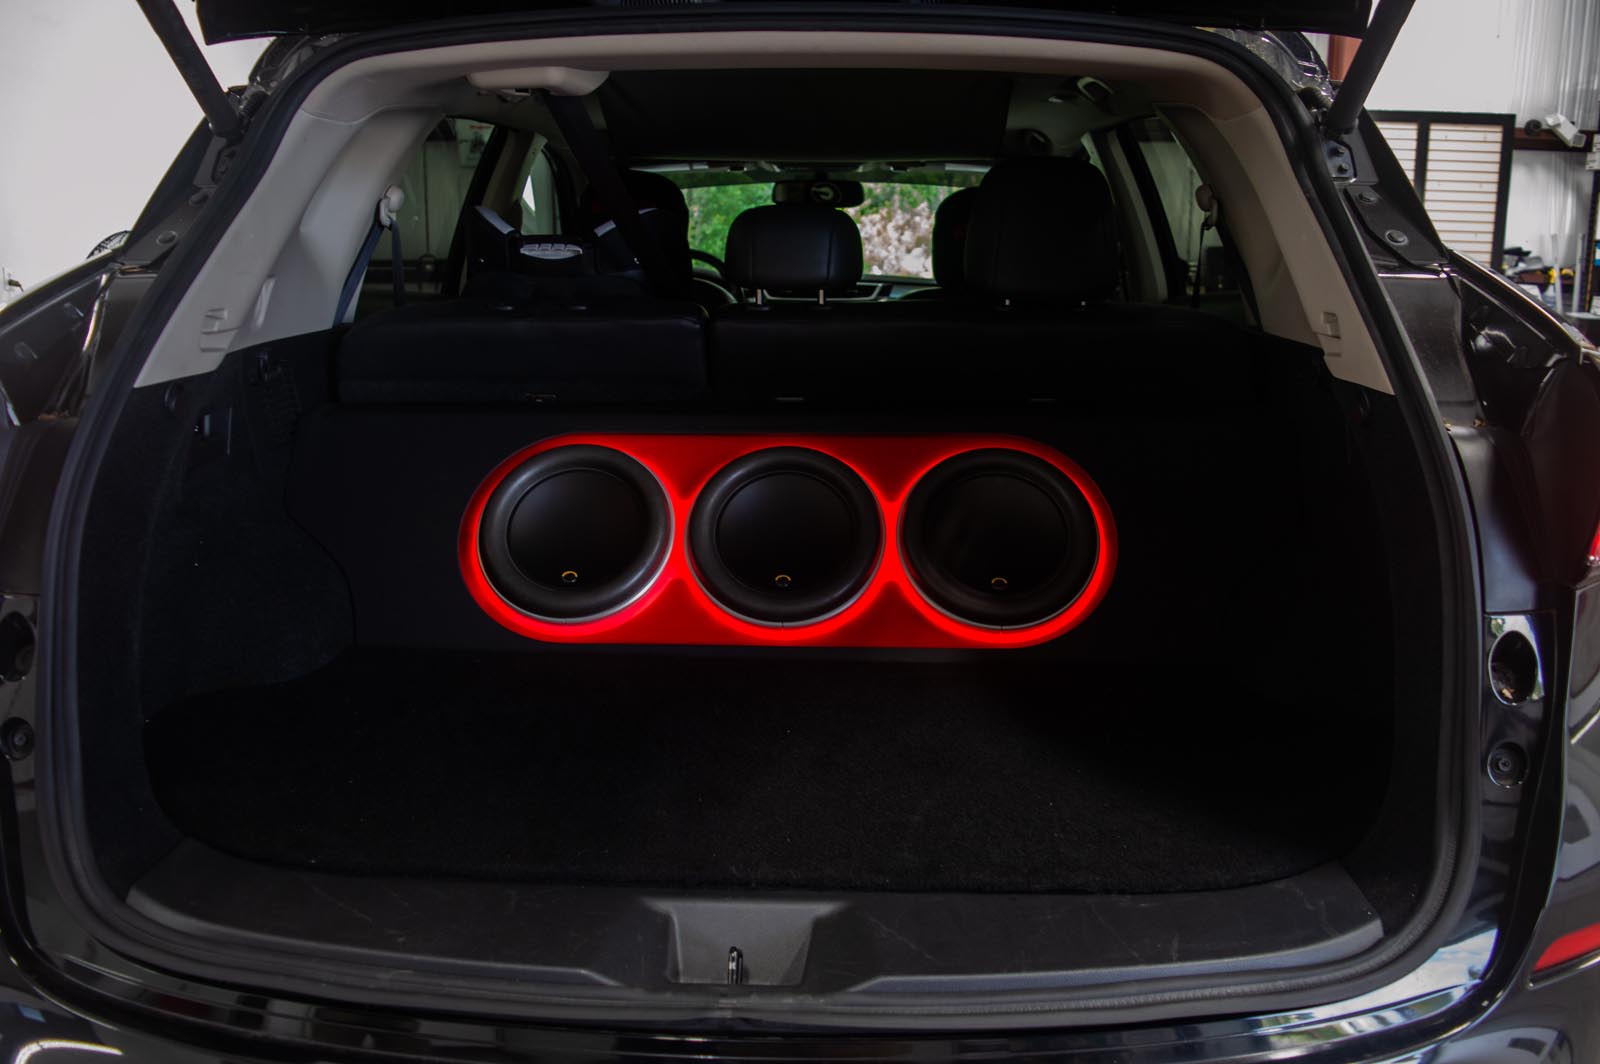 2015 Nissan Murano Car Stereo System by Explicit Customs in Melbourne FL Focal and JL Audio